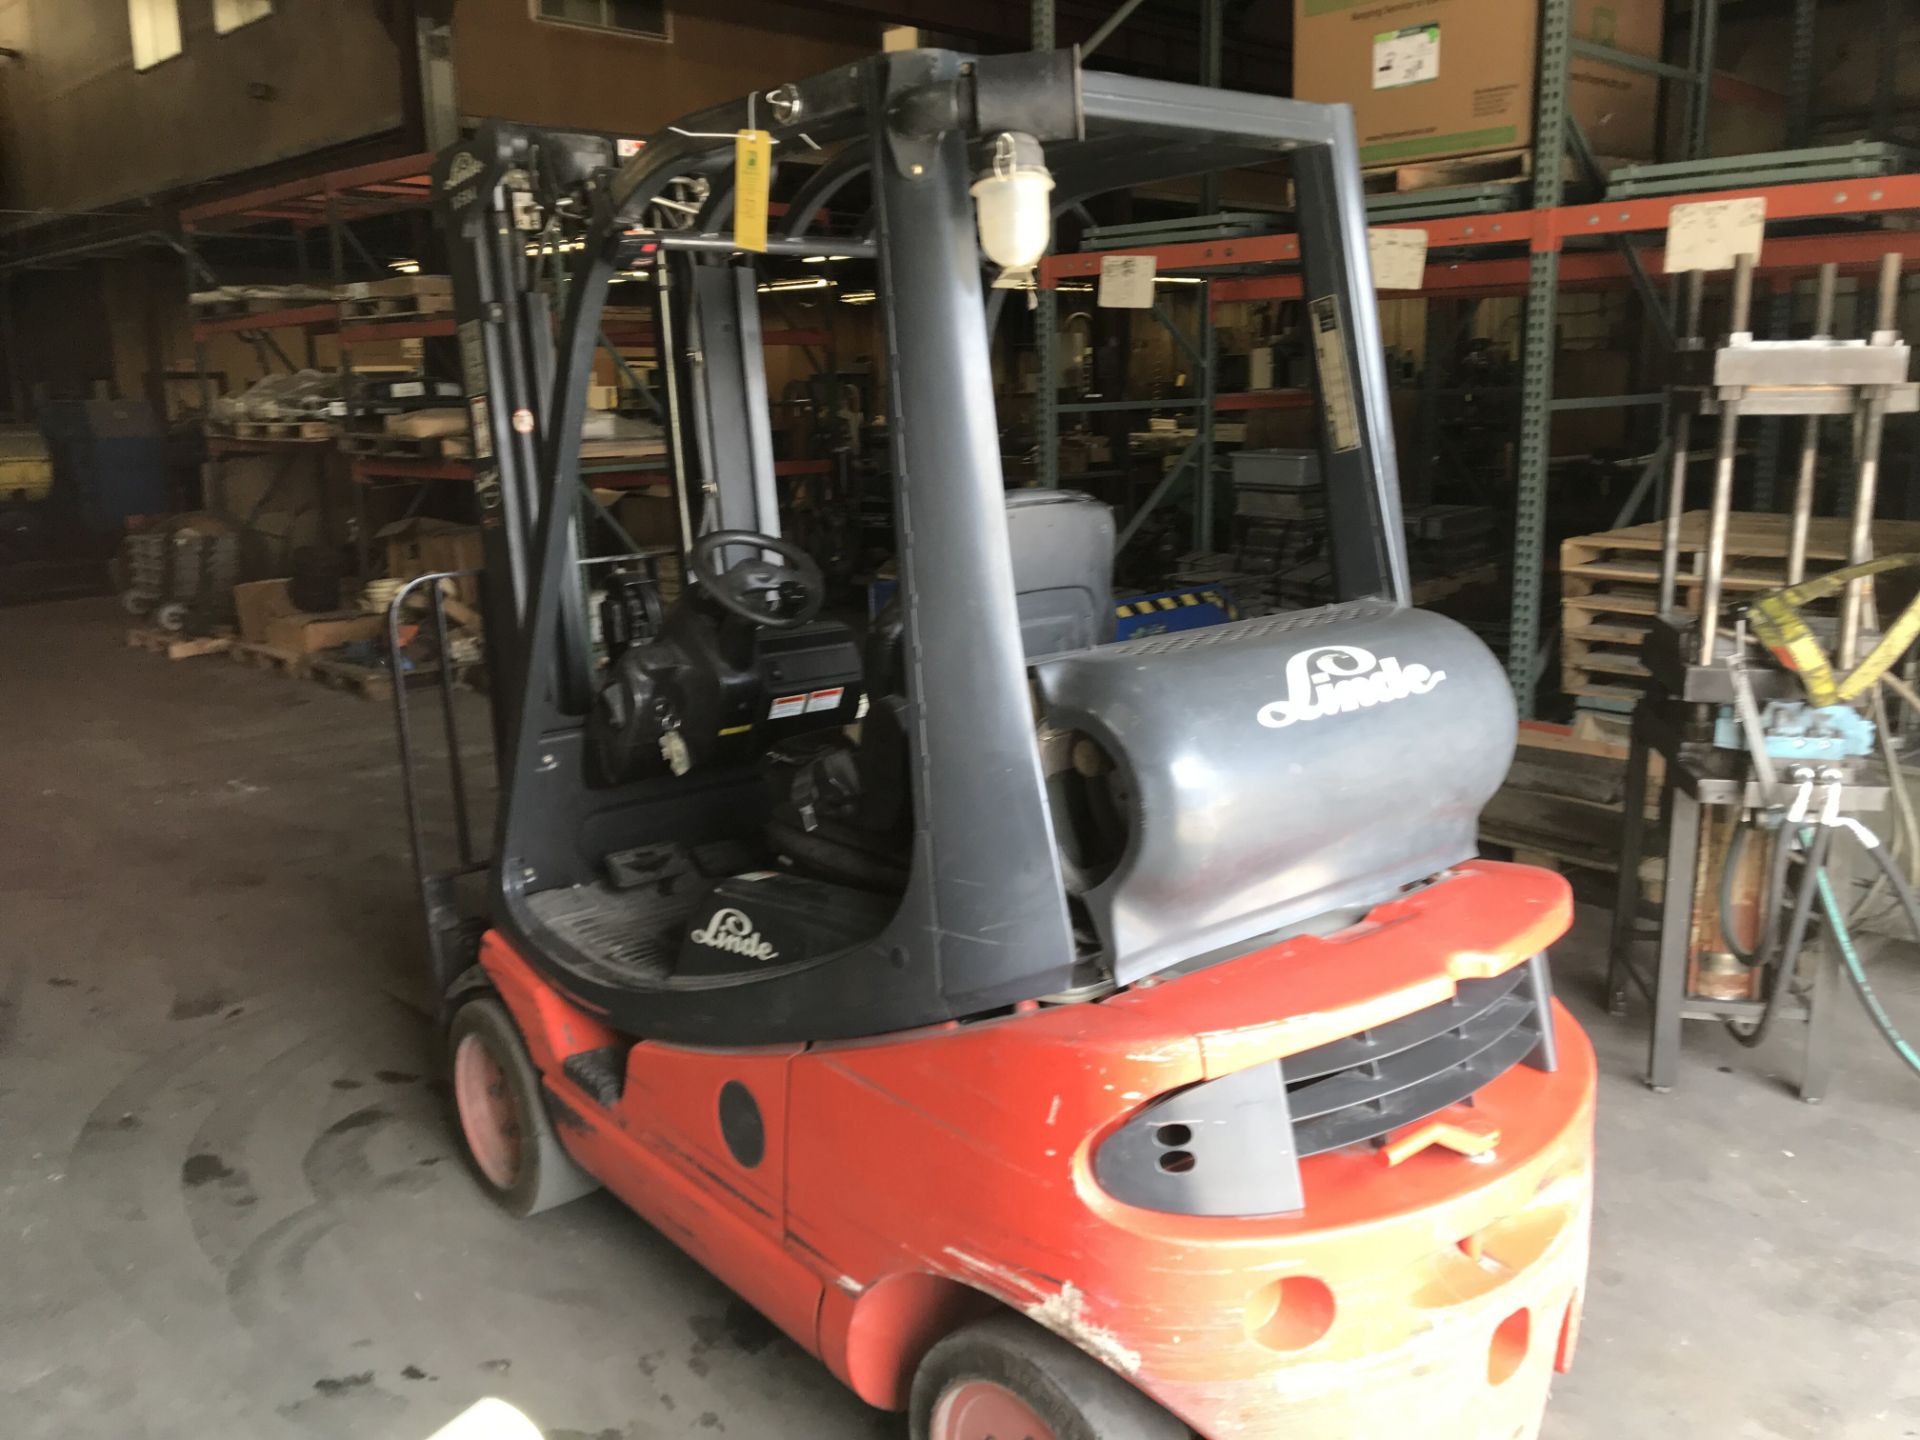 Linde Forklift, Model #H20CT-600-03, S/N #H2X35ORO2244, Hydrostatic Drive, Hours 1053.7